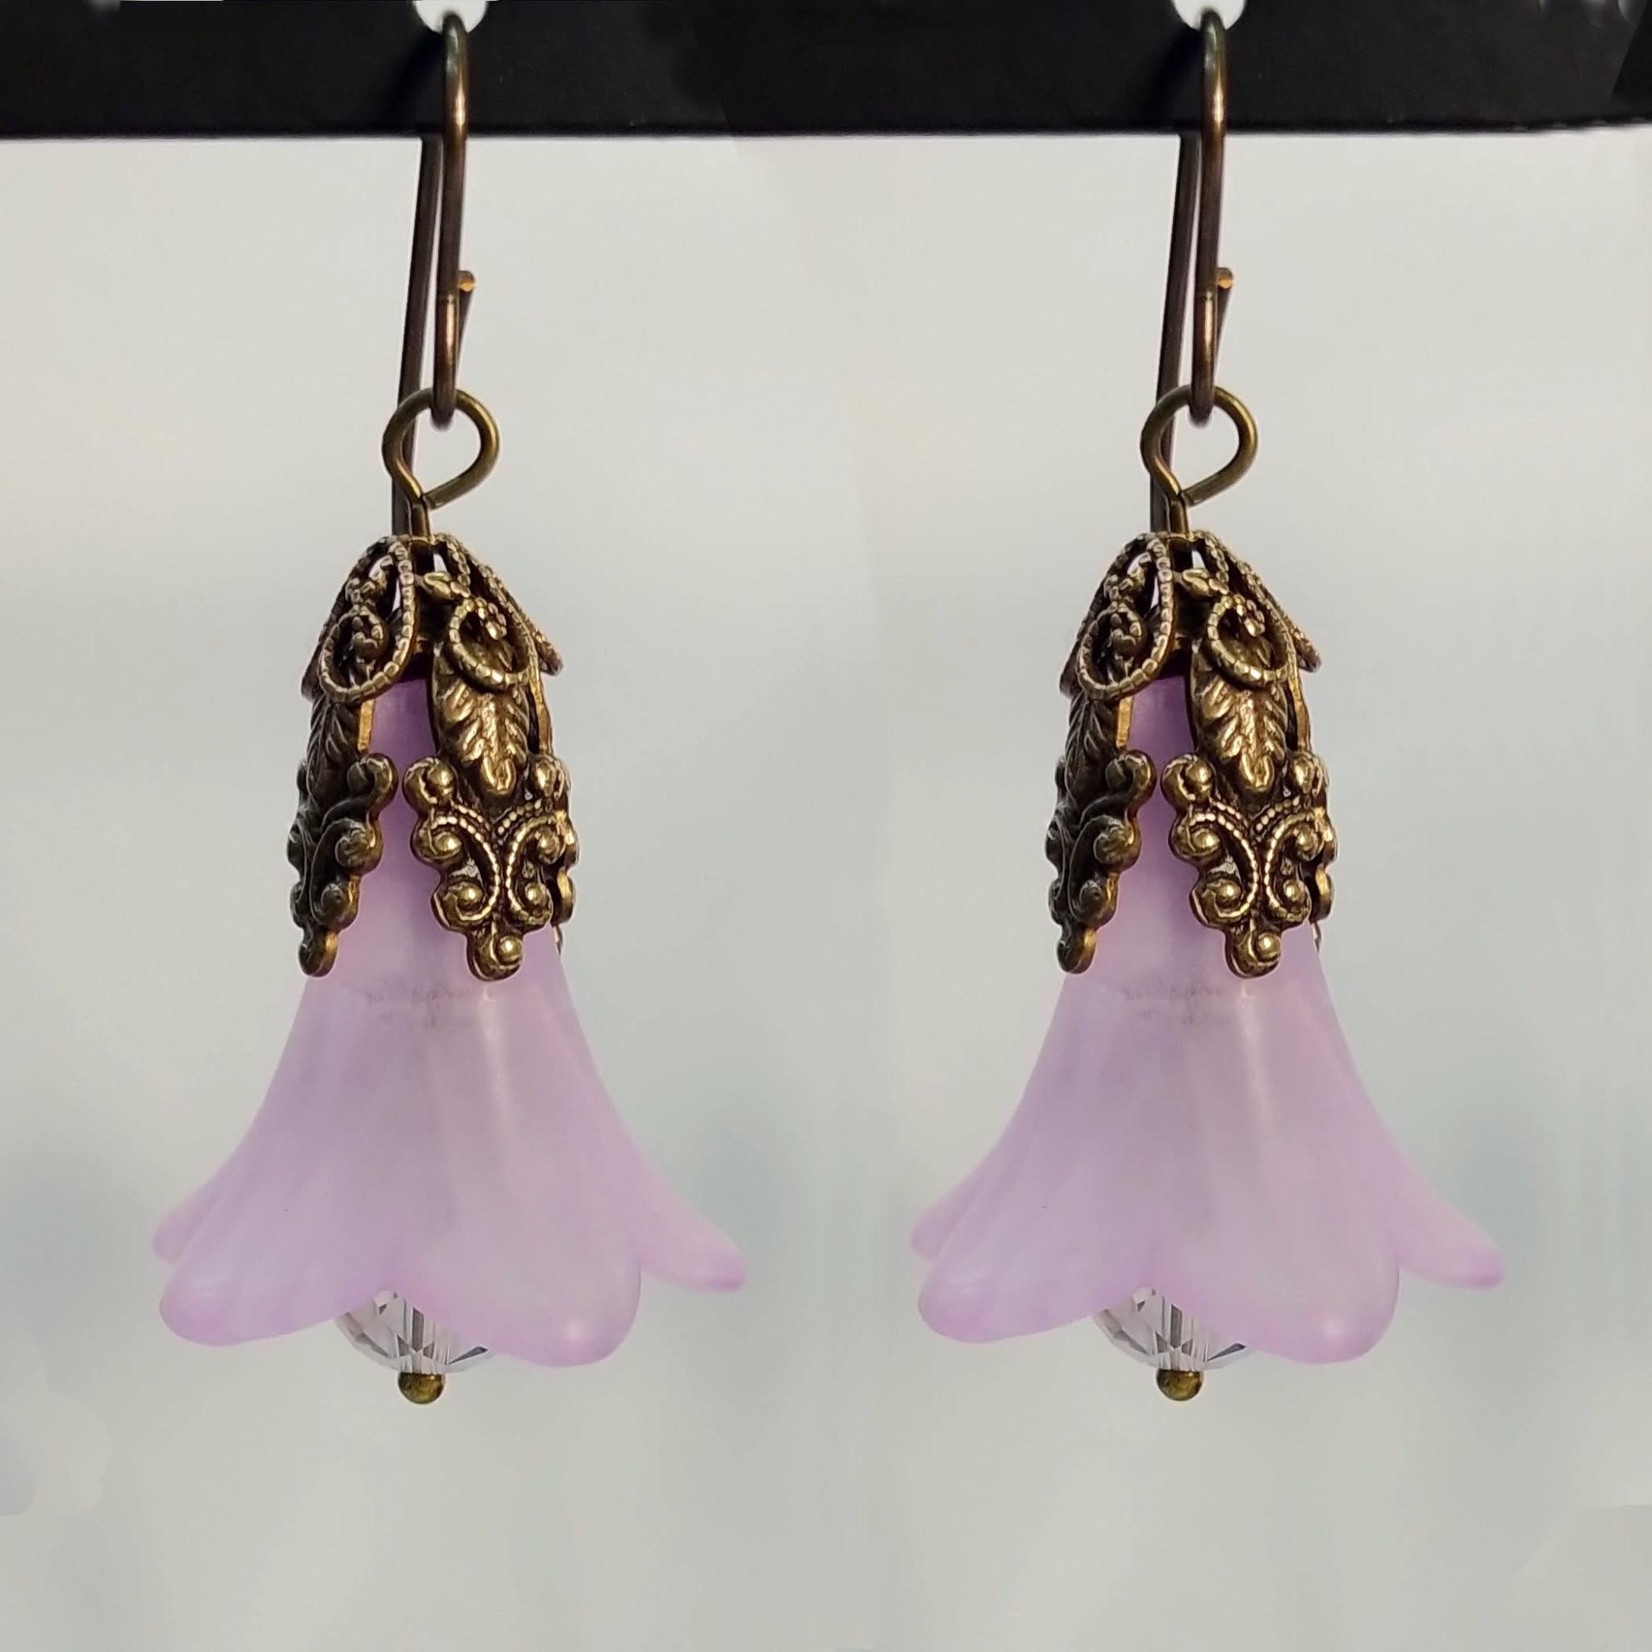 Bead Inspirations Lucite Wisteria Purple Earring Kit